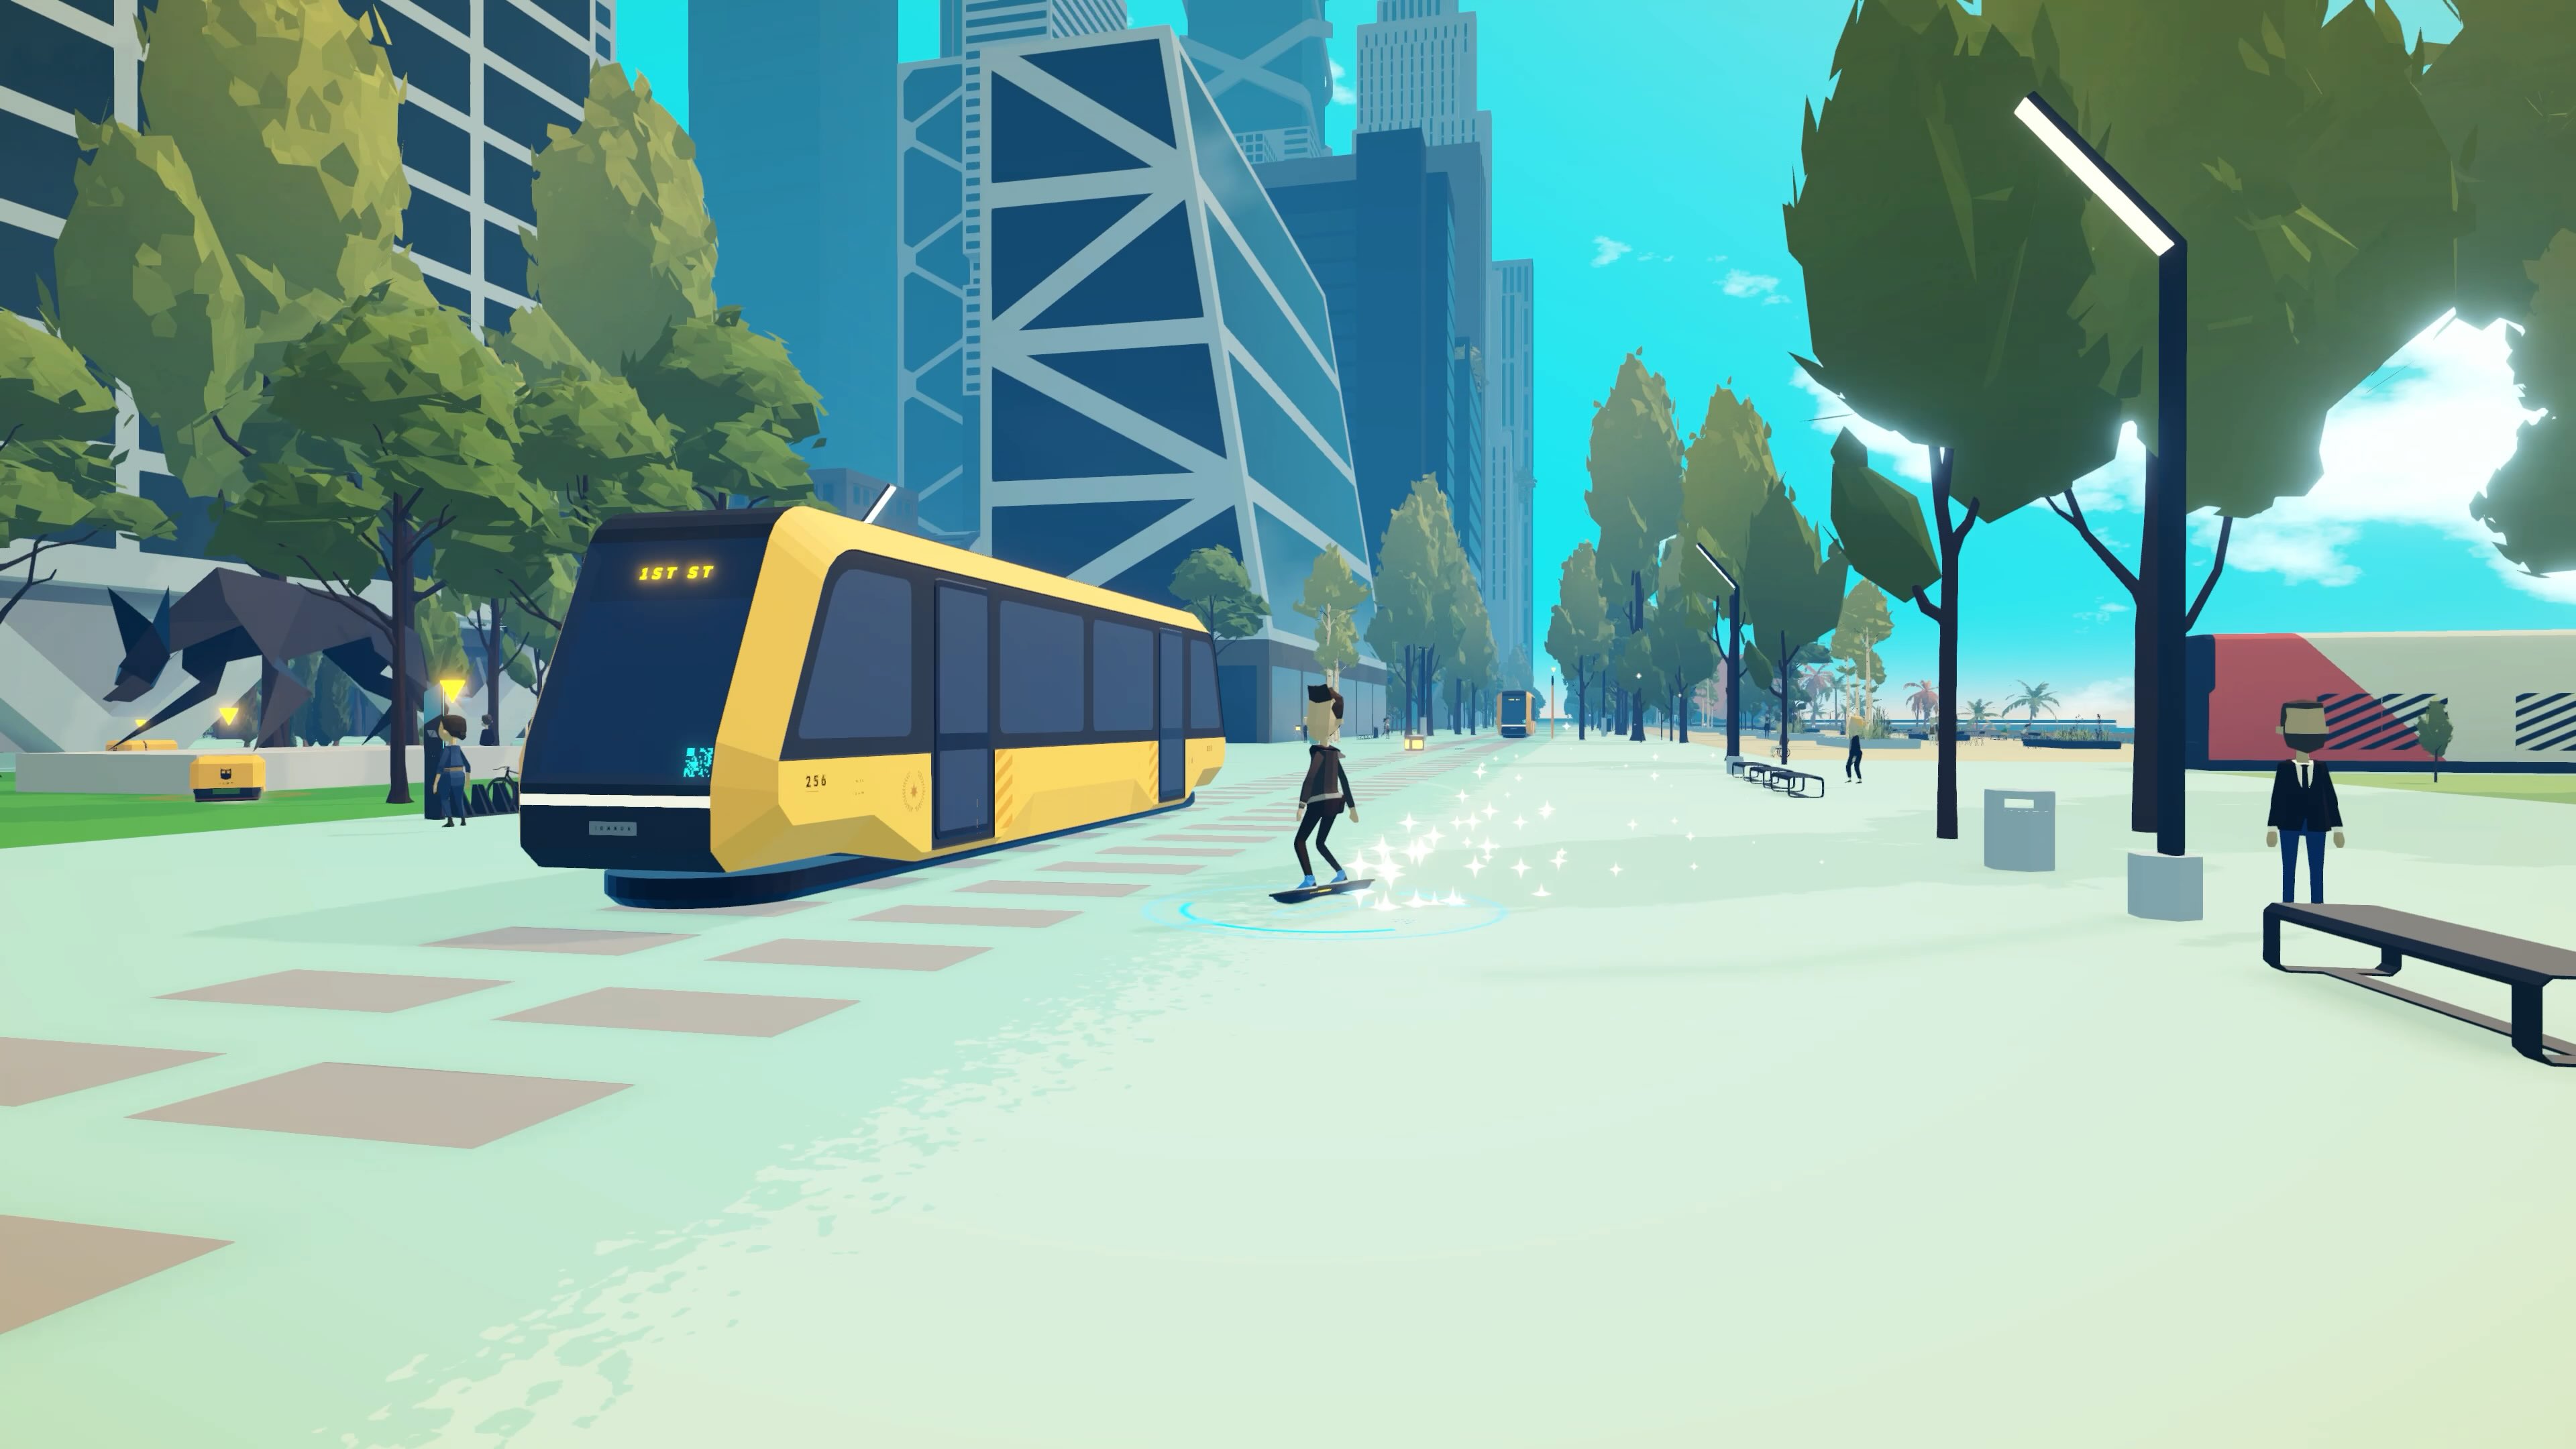 Protagonist riding hoverboard next to tram